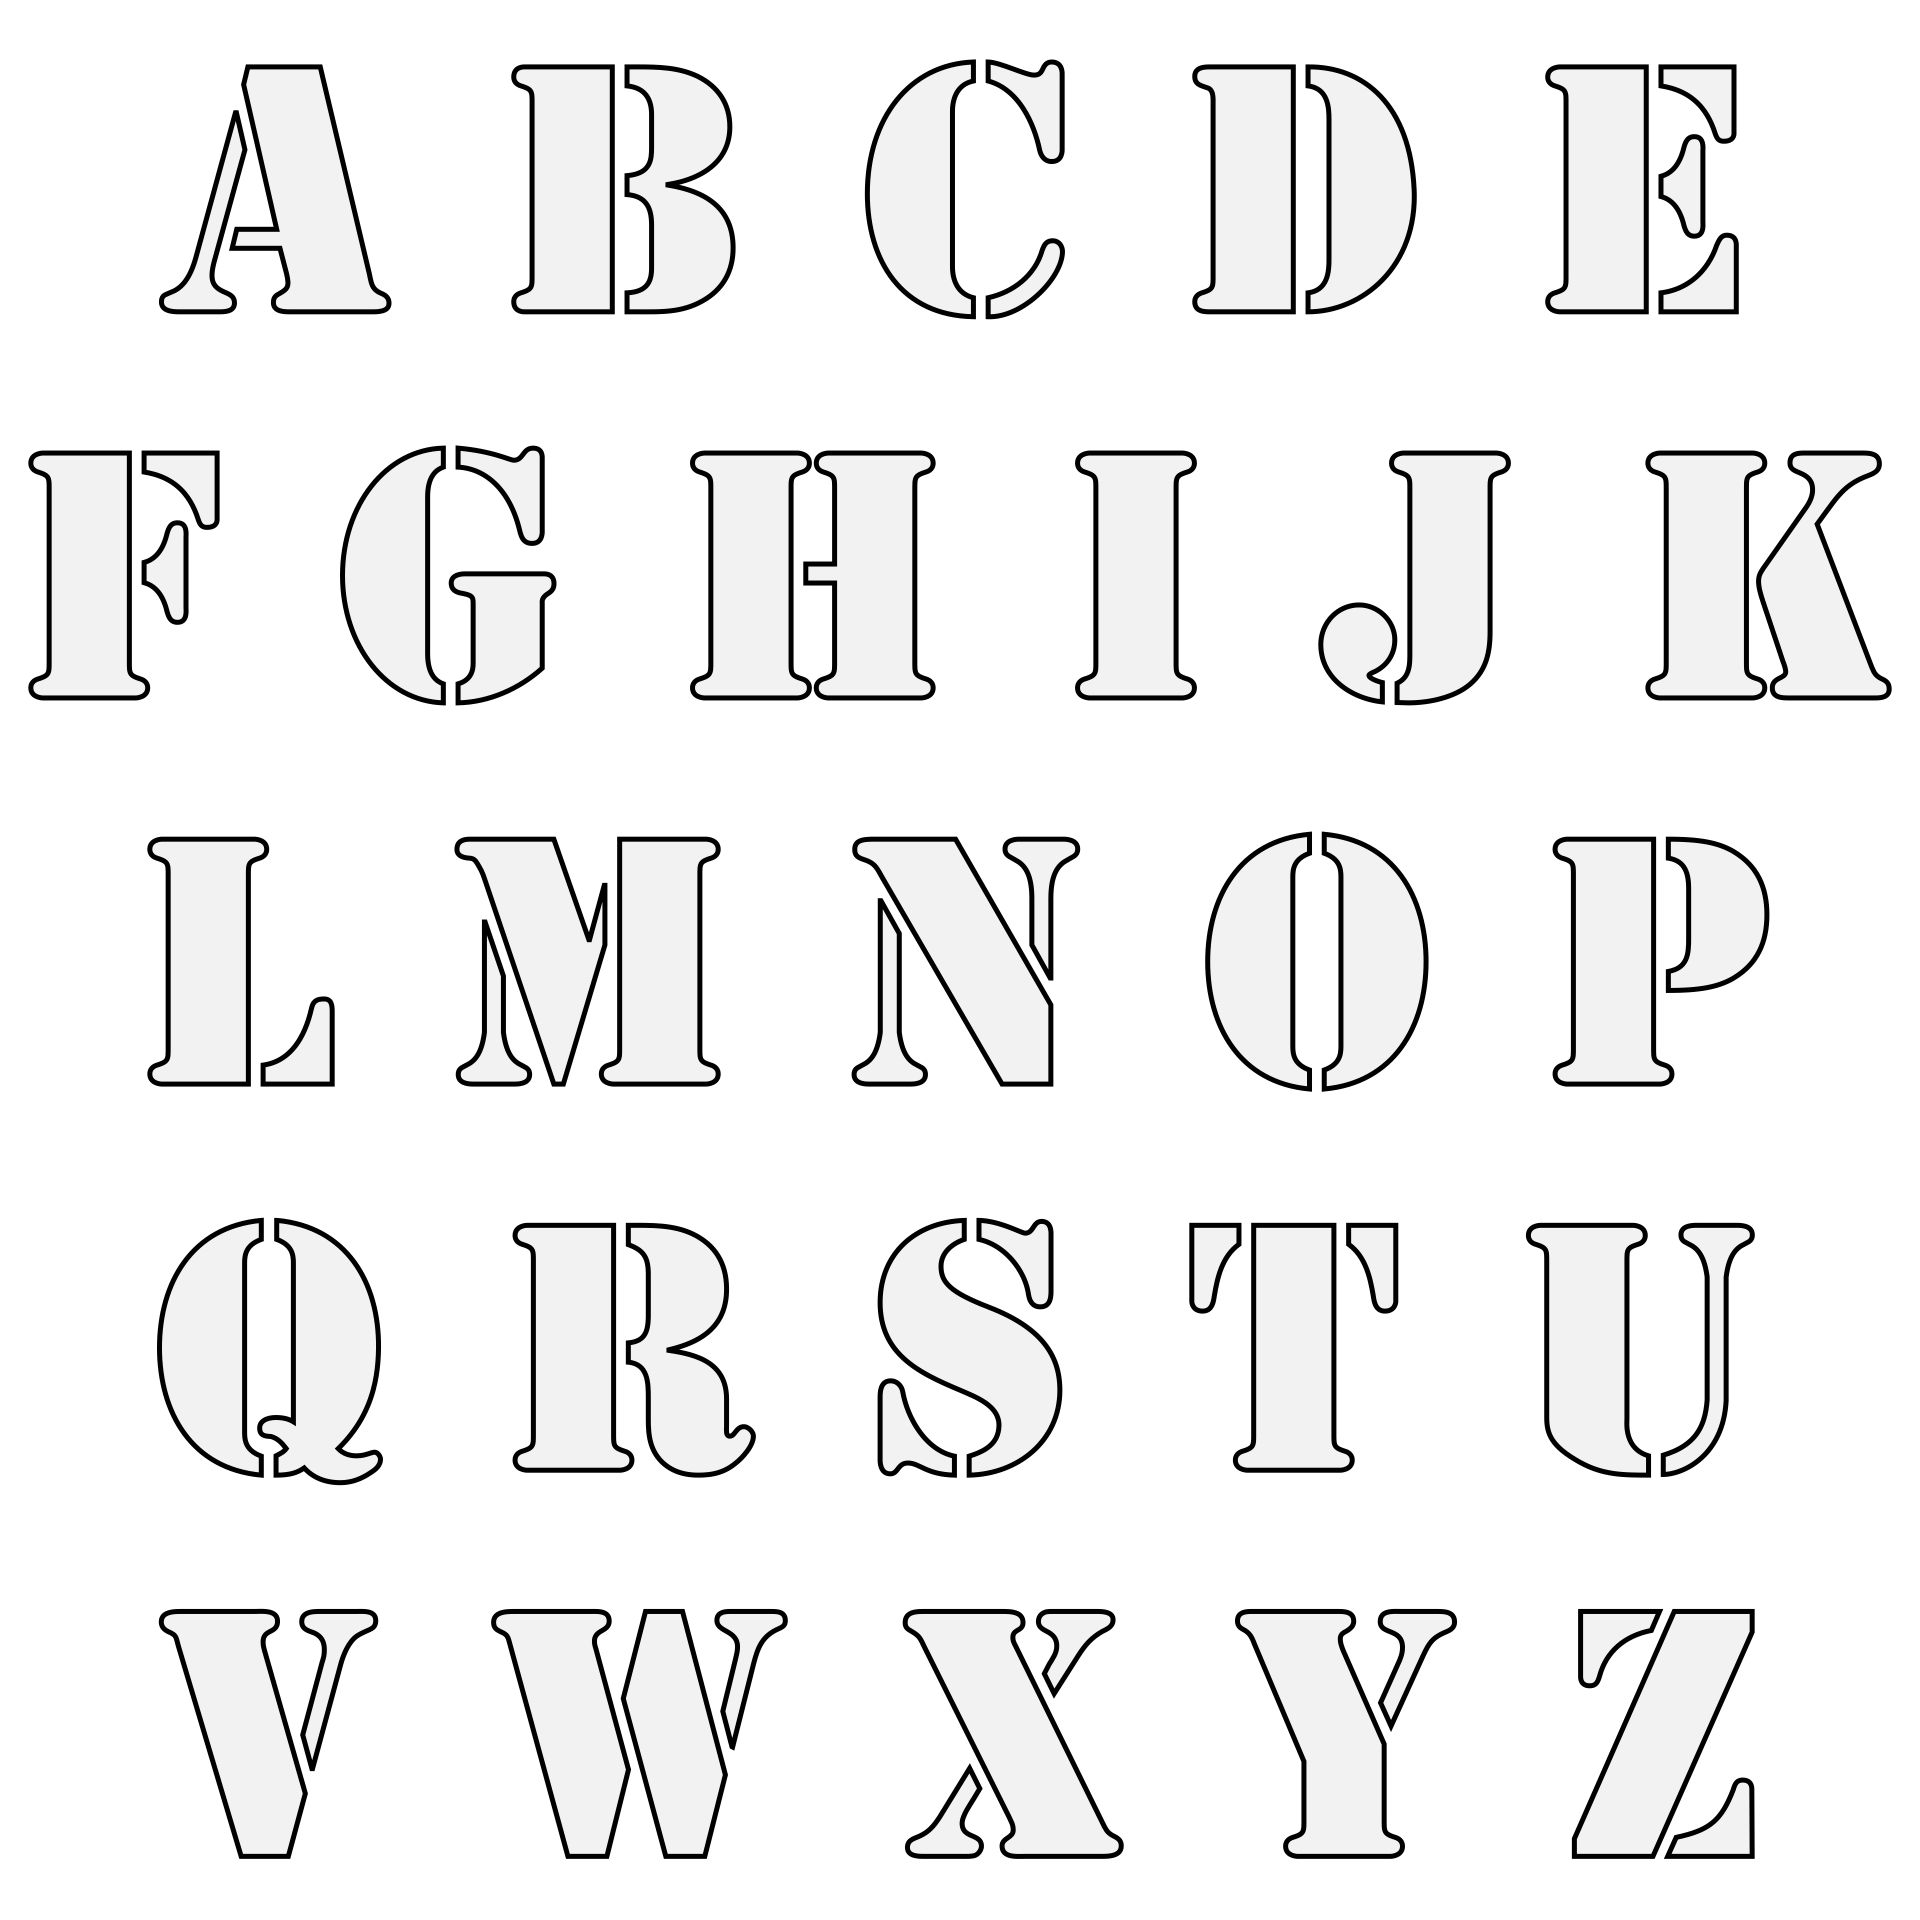 6 Best Images of Printable Cut Out Letters Free Cut Out Letters